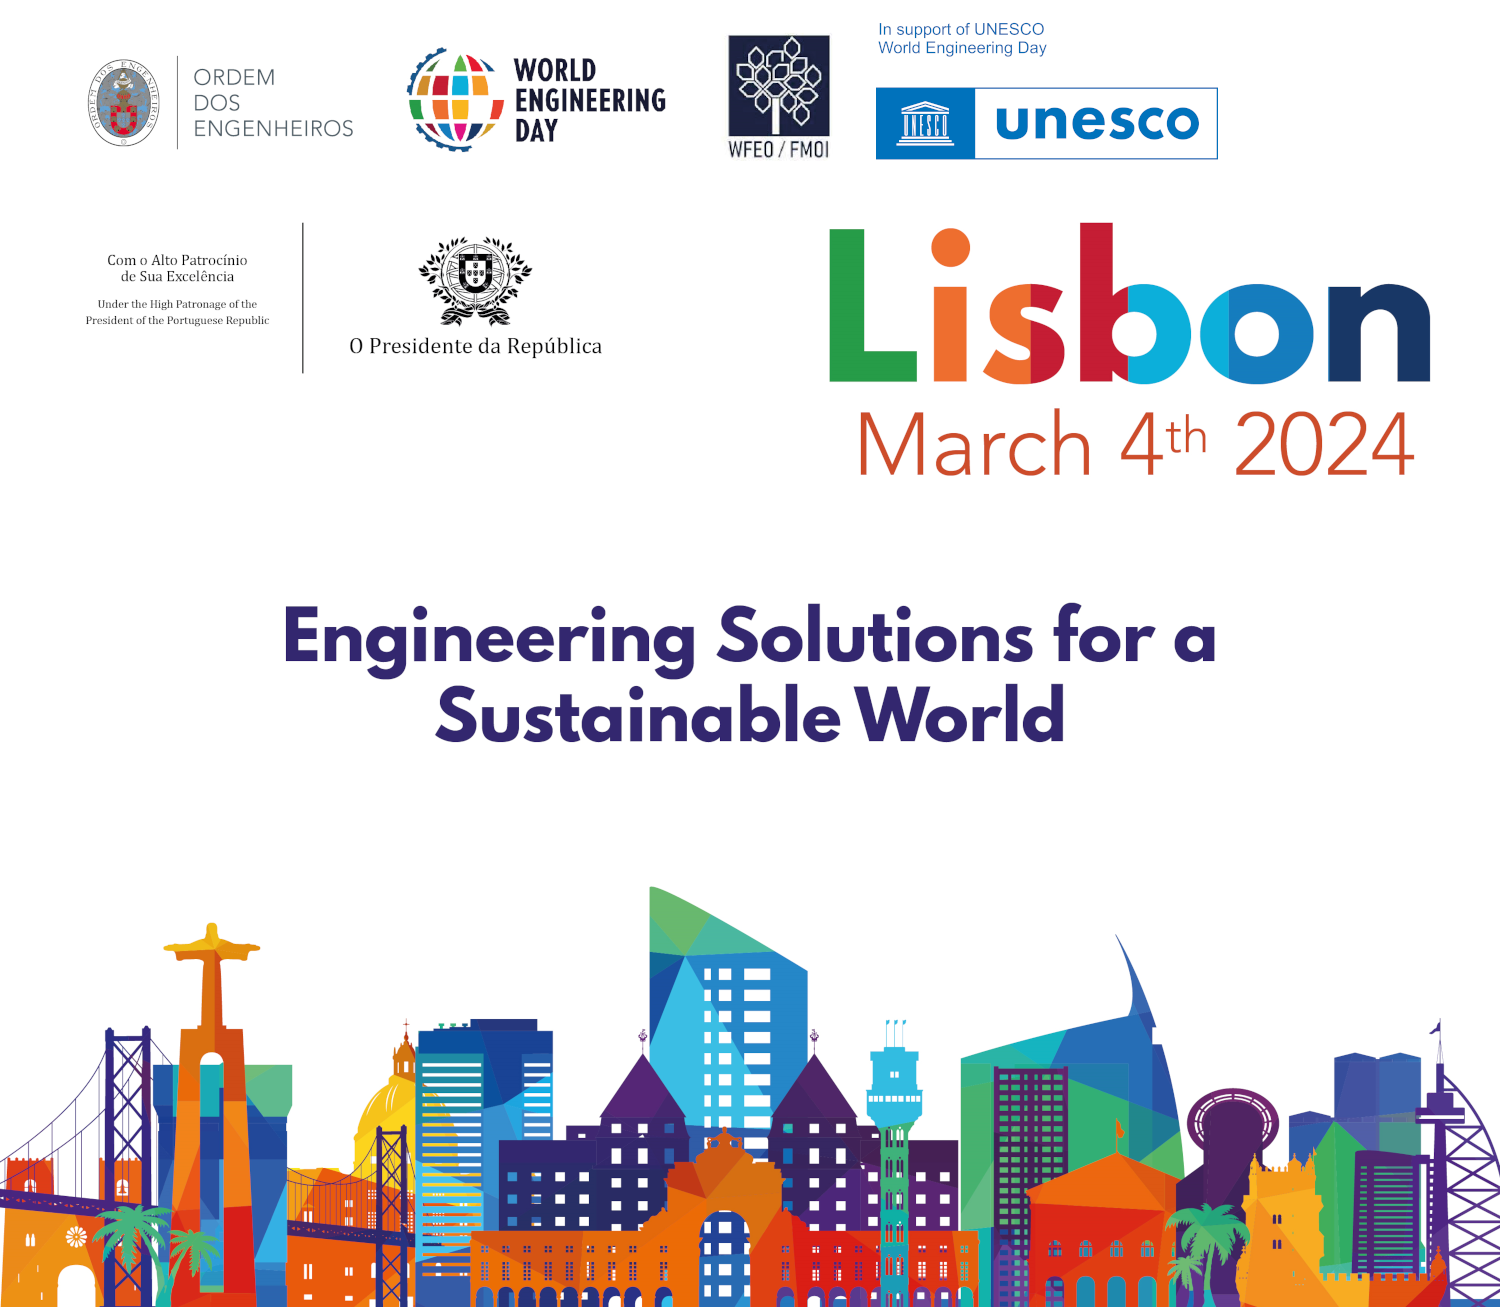 The WED 2024 Conference in Lisbon "Energy Transition and Sustainability"